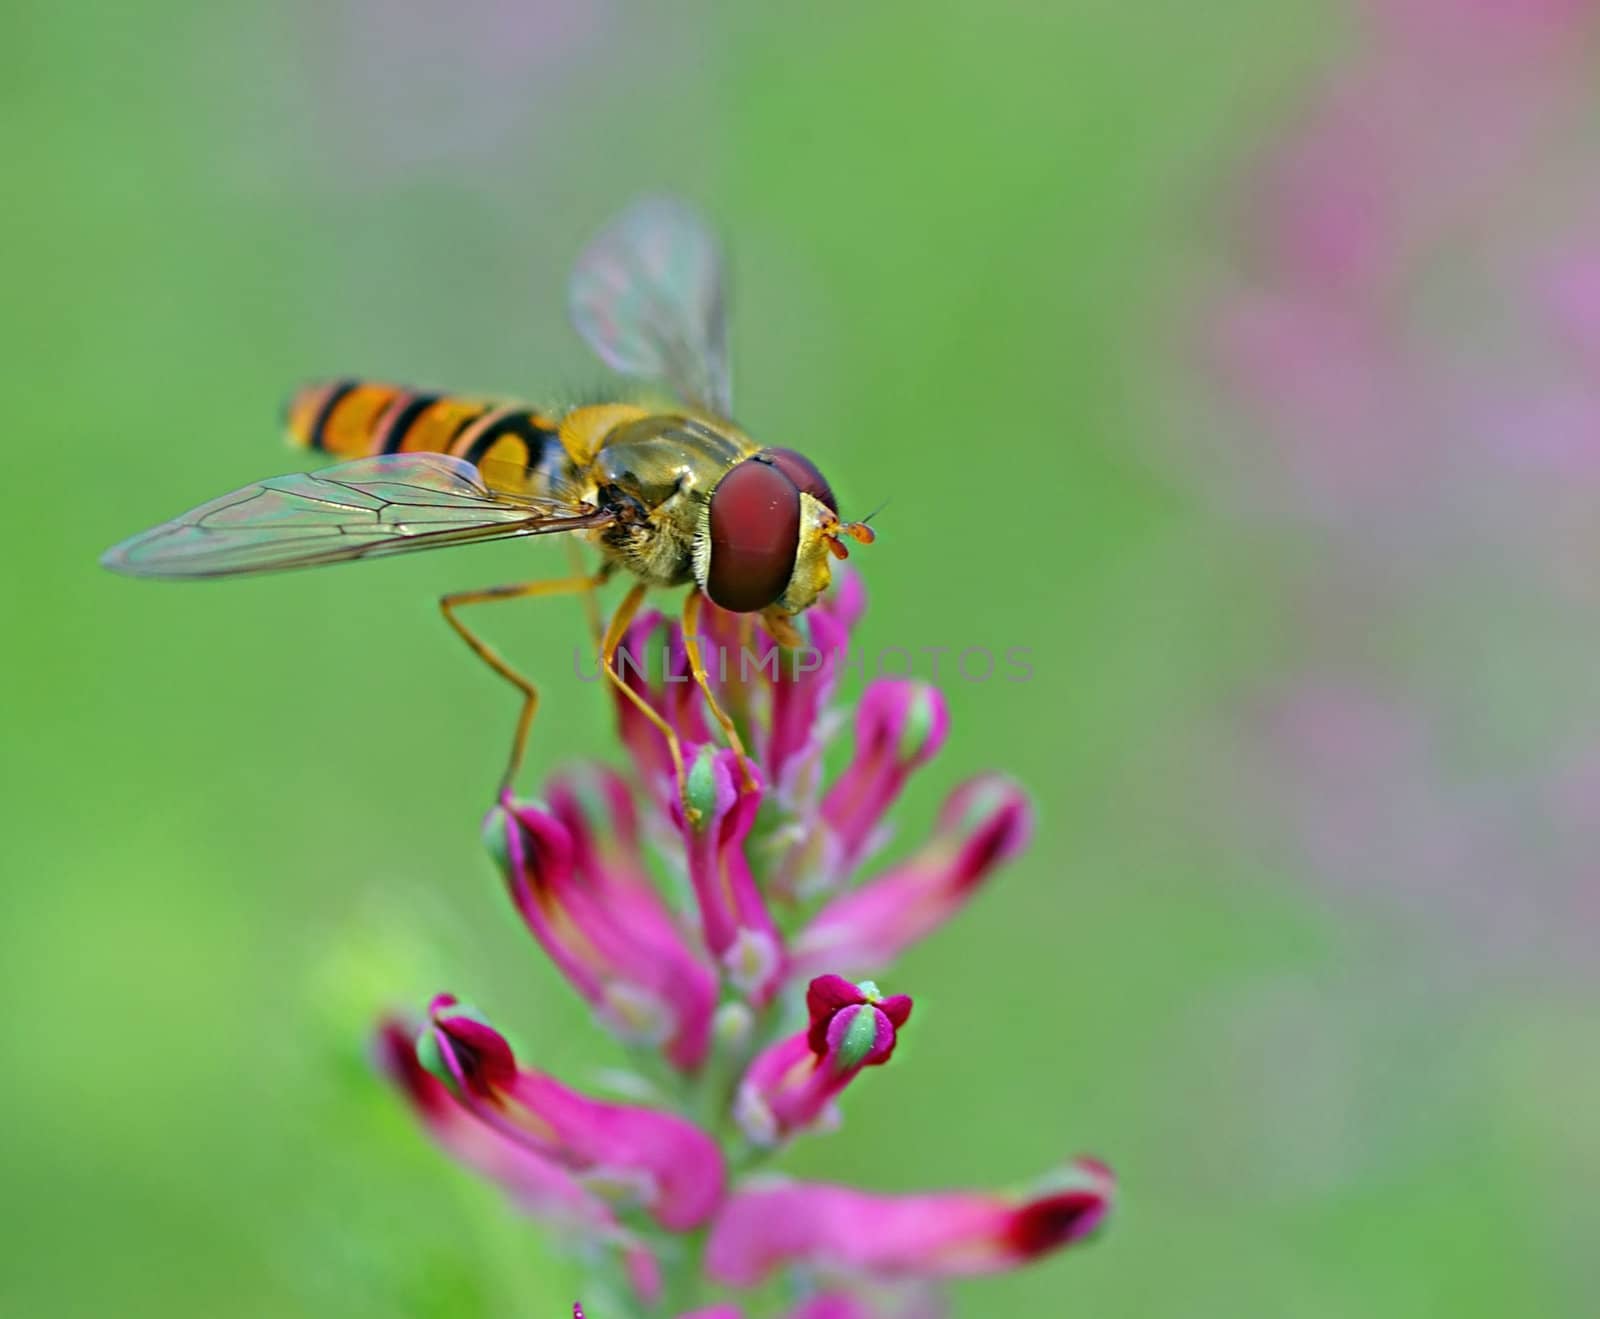 Hoverfly positioned on flower for finding food